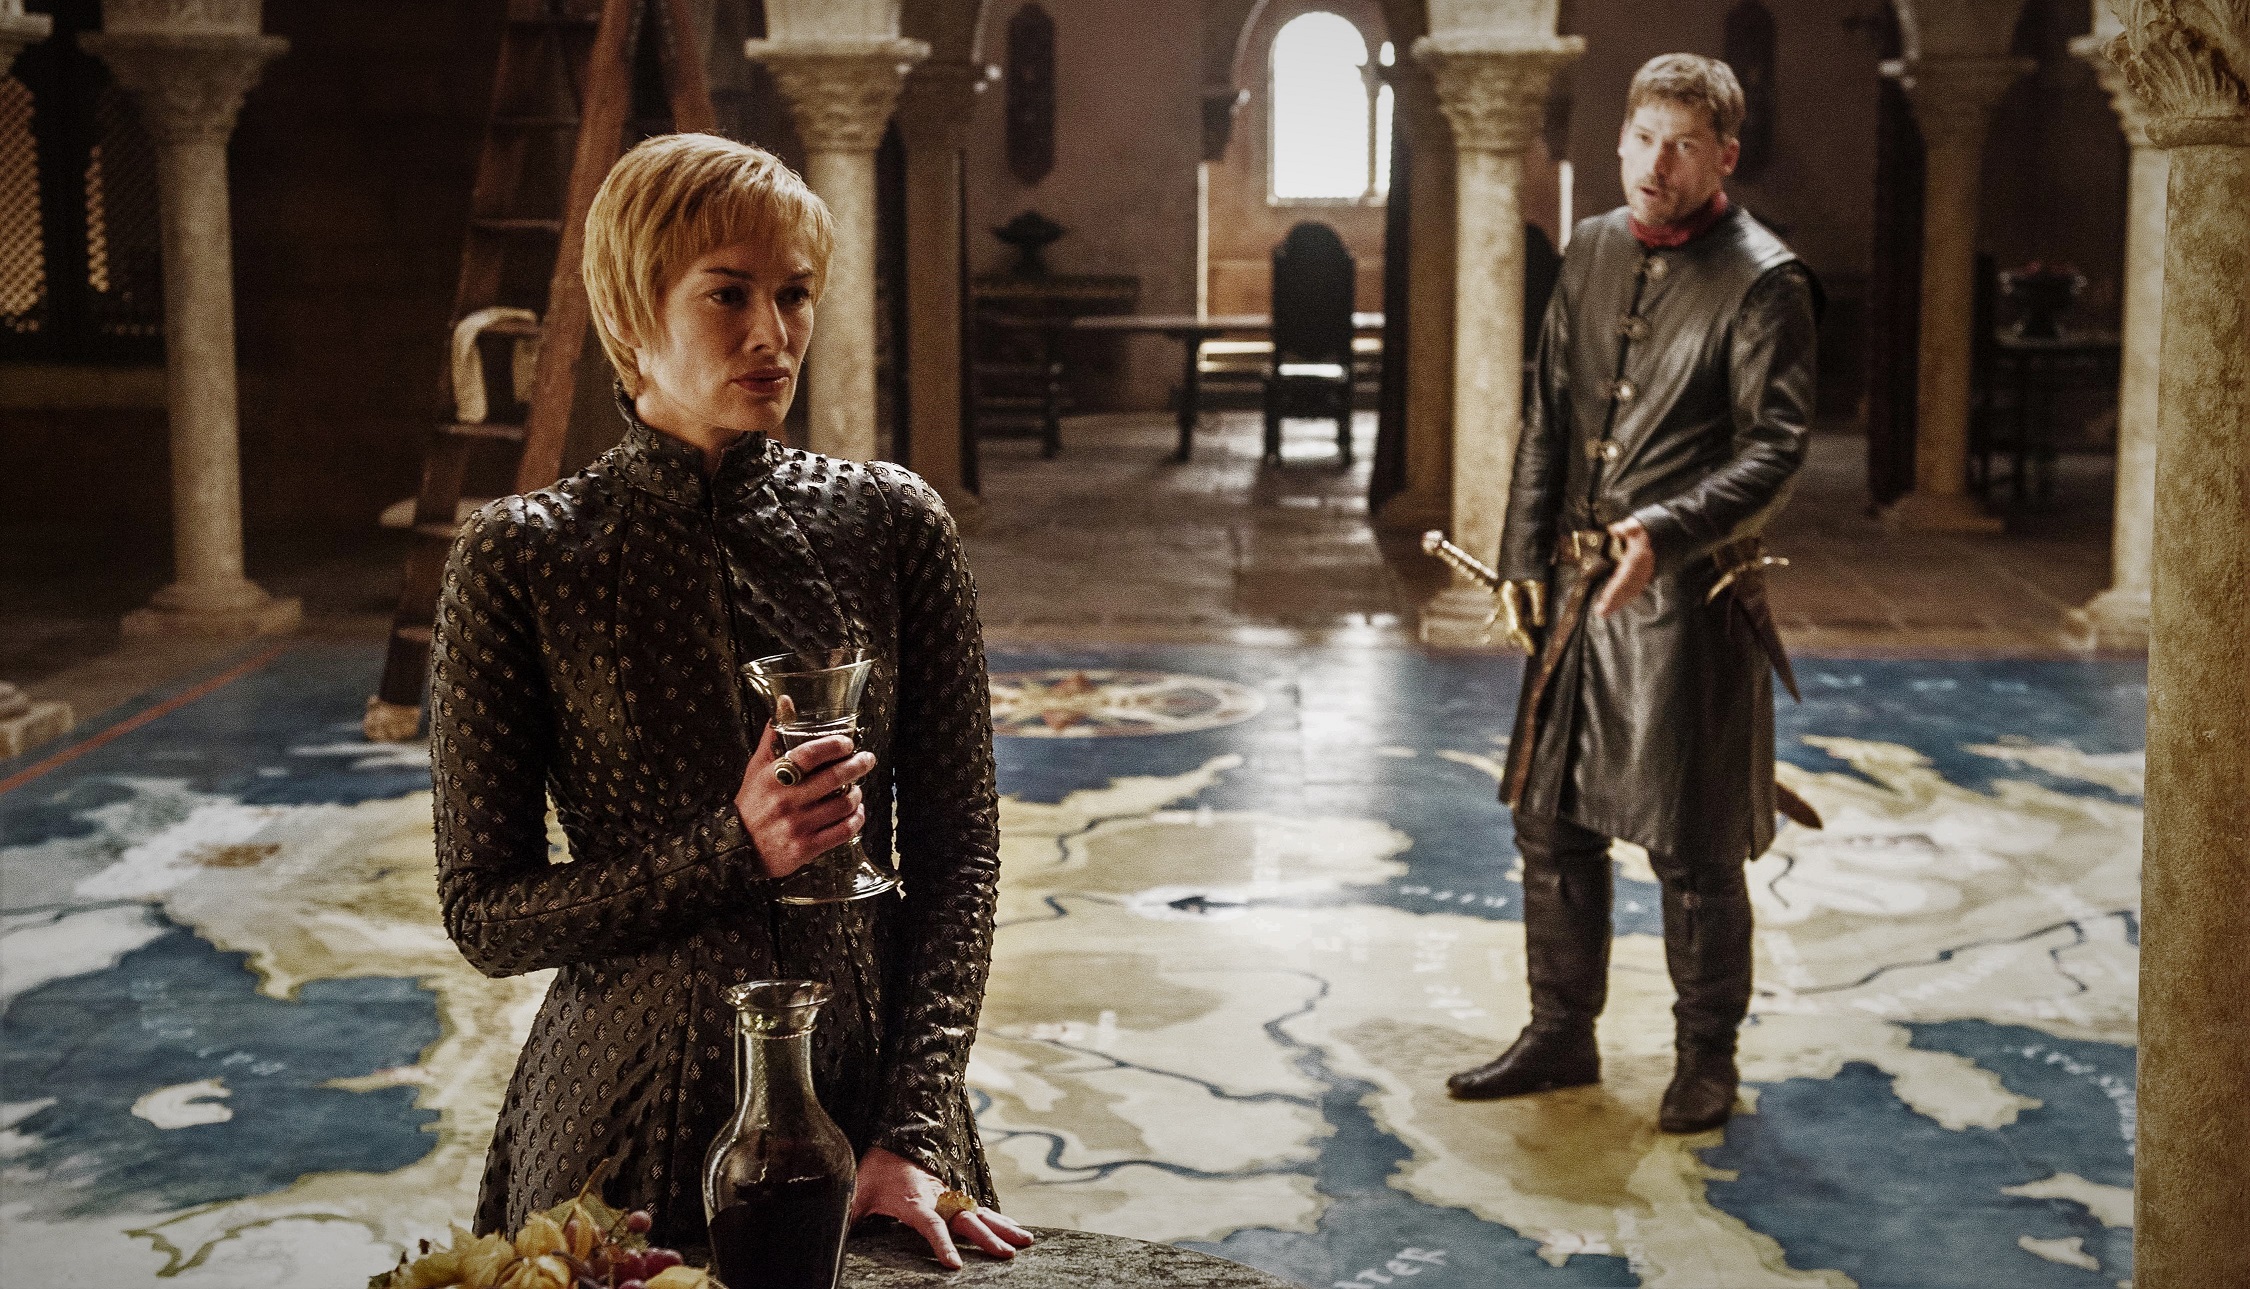 Cersei, Jaime, and relationship counseling